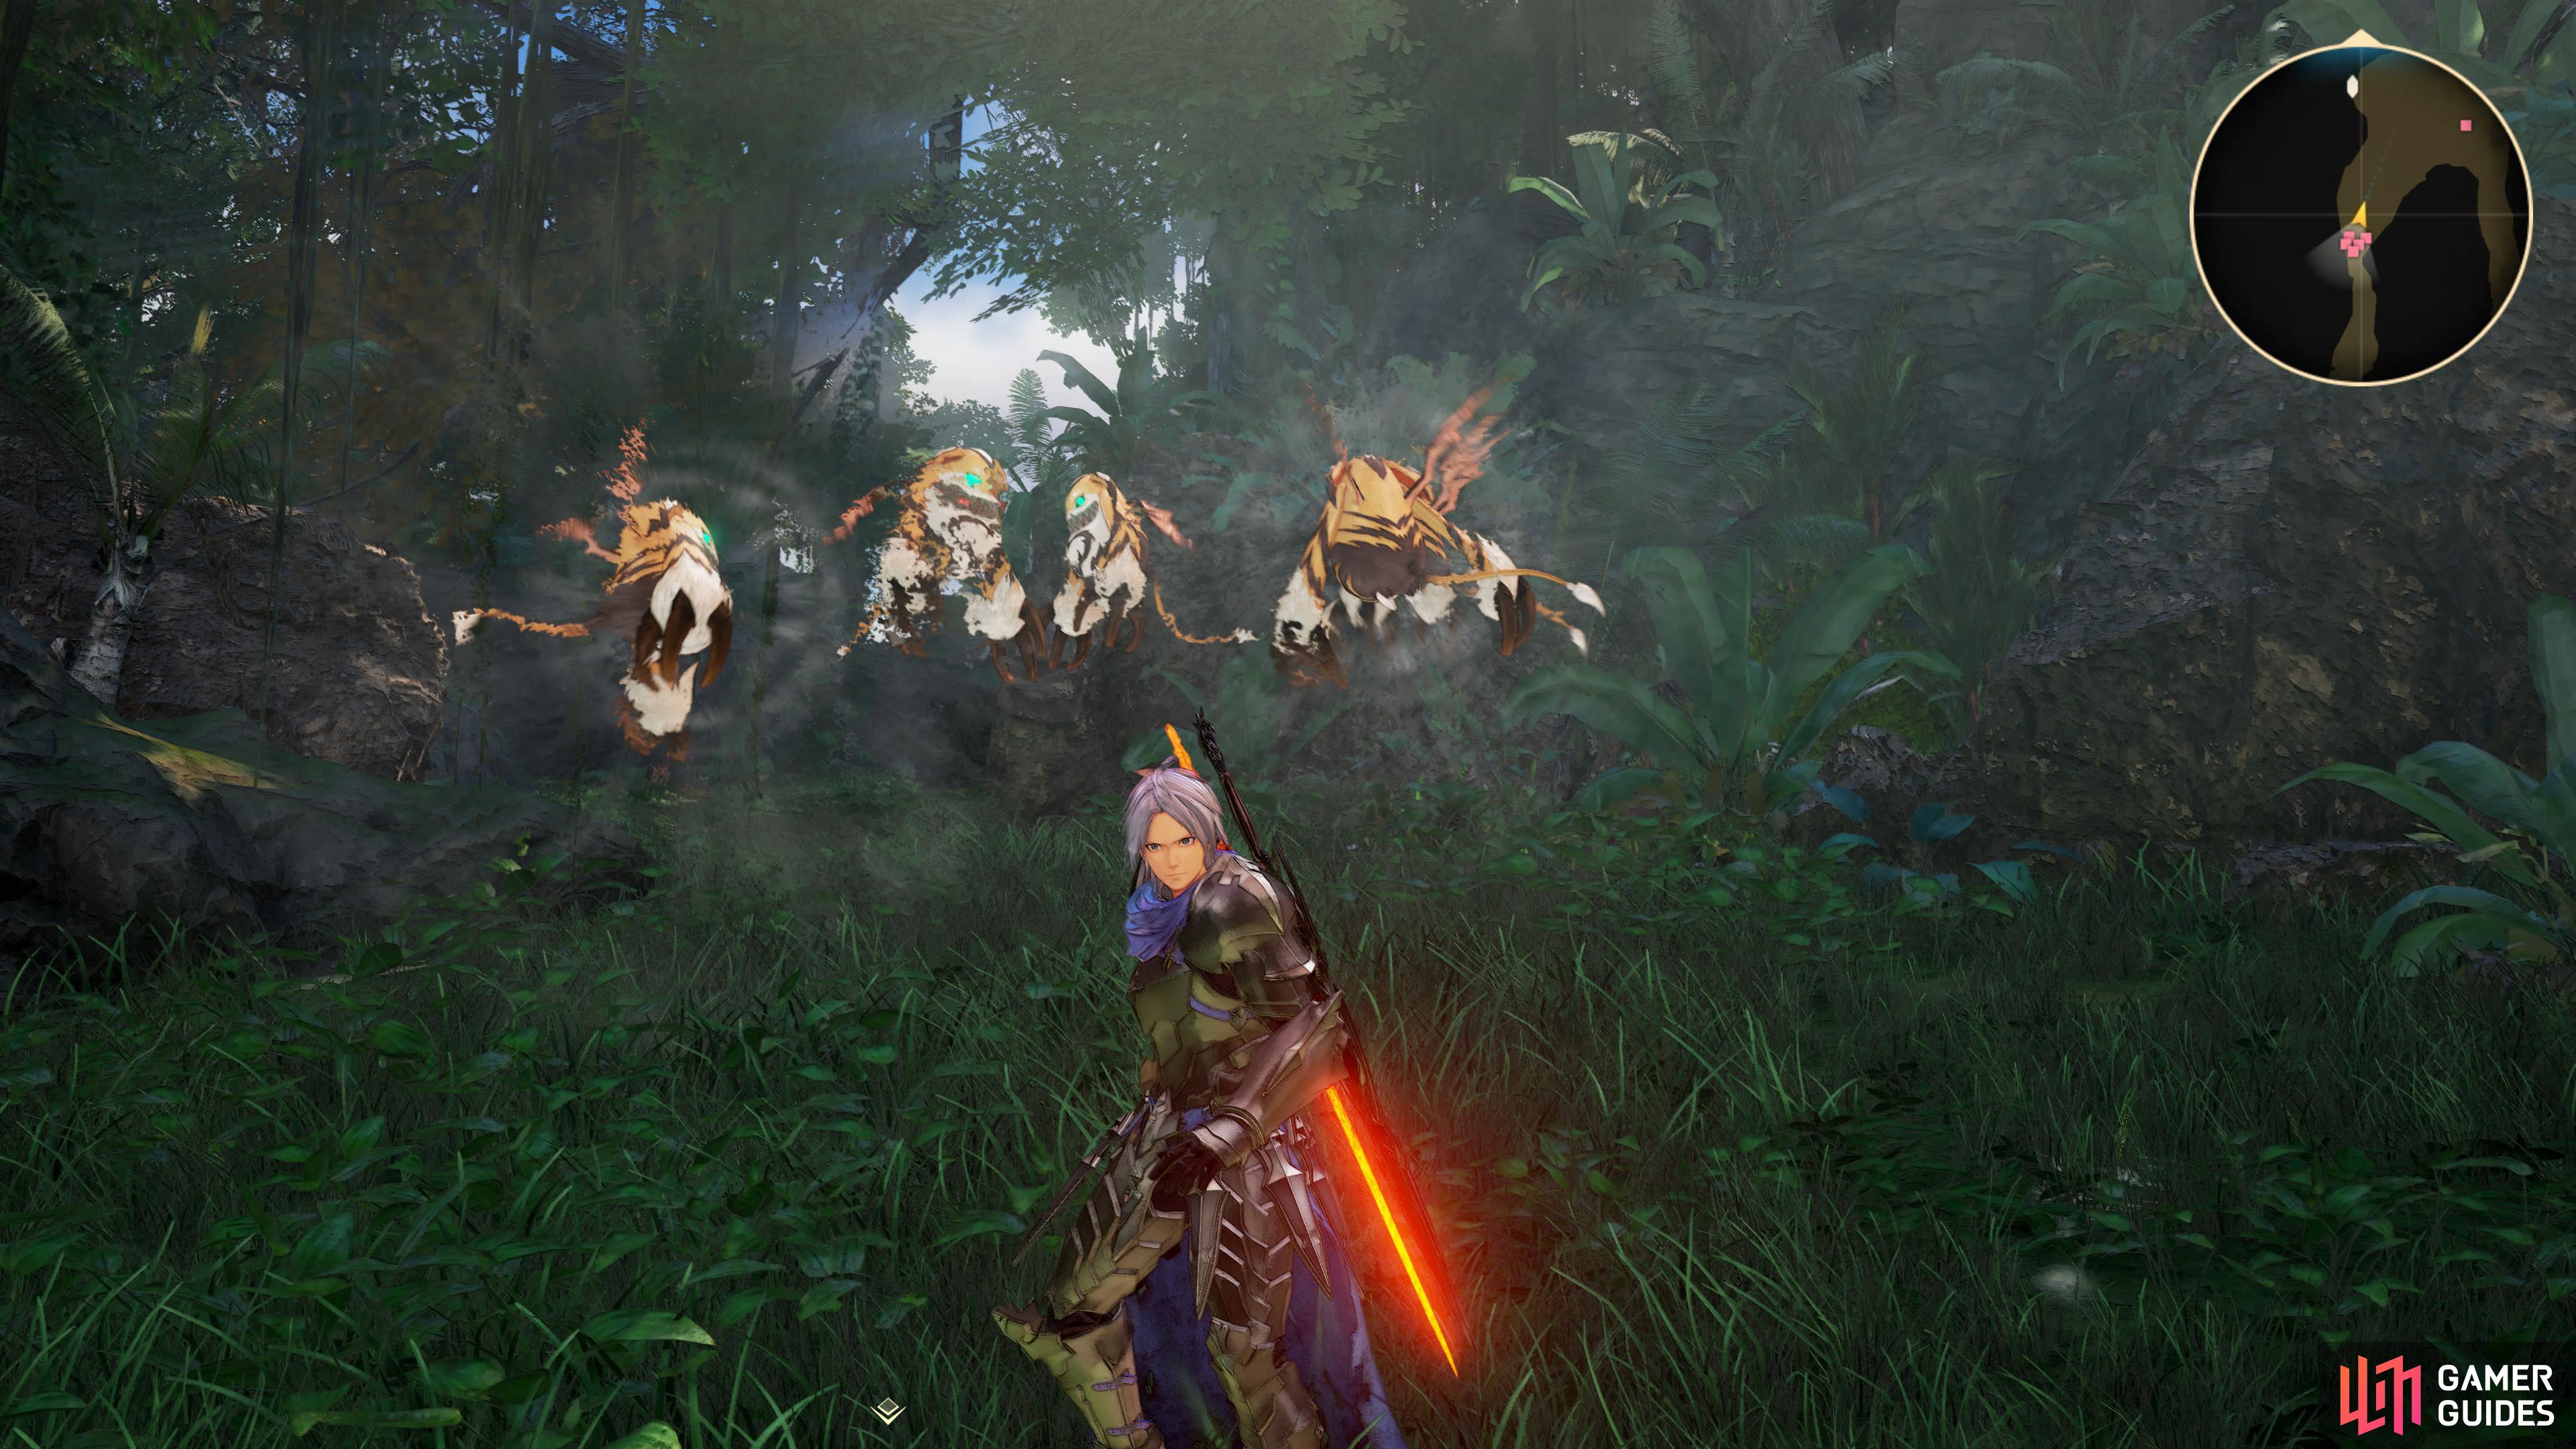 Spirit Tails can be found at the Shinefall Woods.